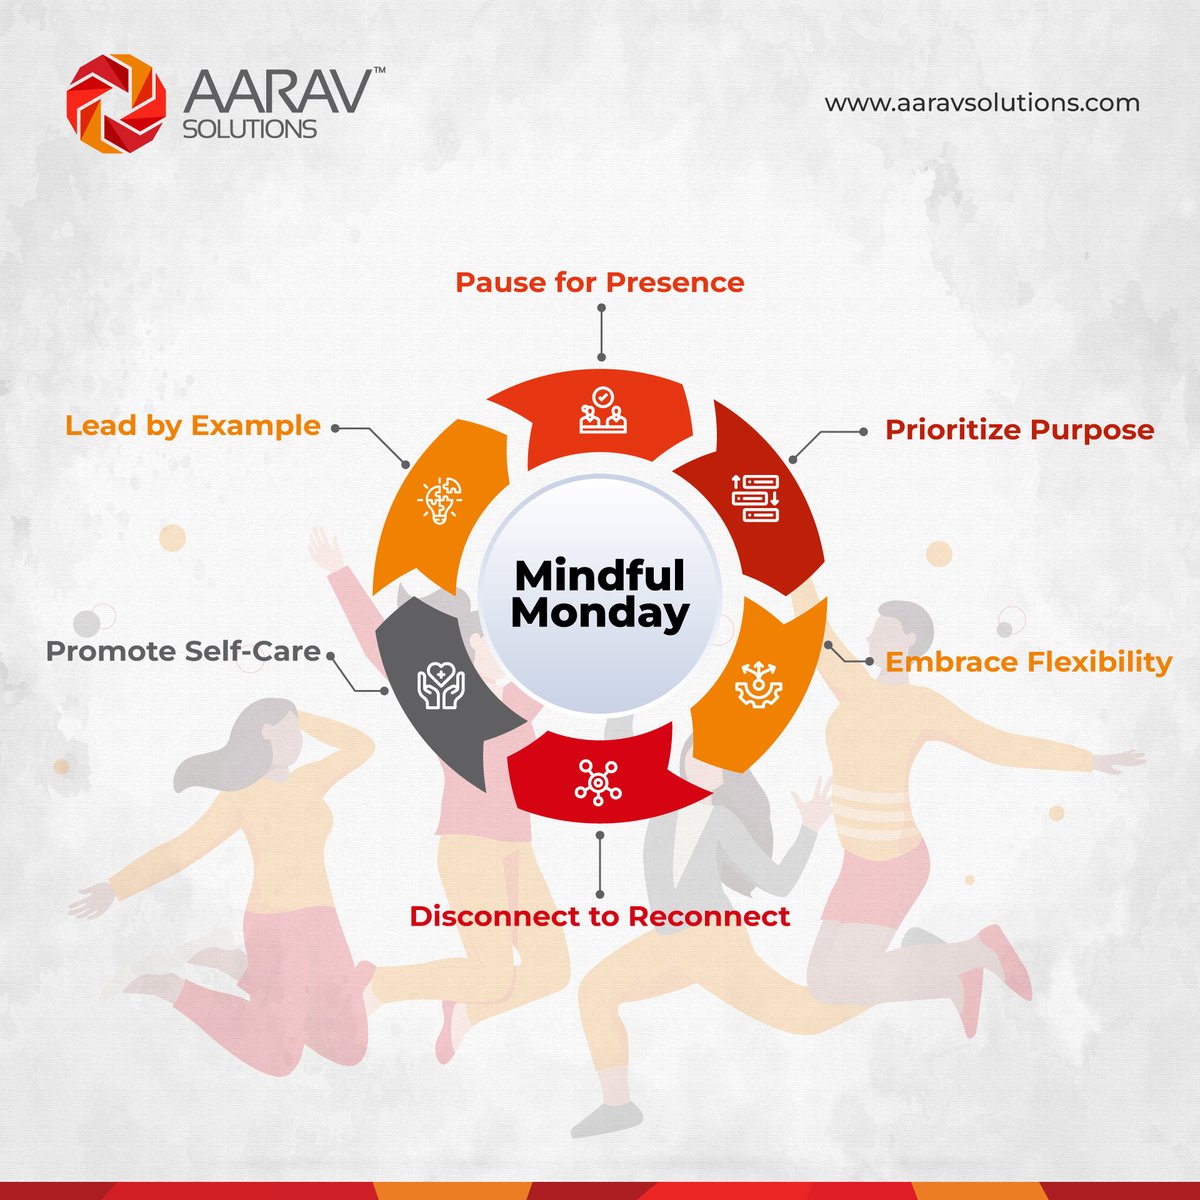 Let's approach this Mindful #Monday with a commitment to fostering a culture of balance within our organization. Wishing you all a harmonious and fulfilling week ahead!

#MindfulMoments #HealthyGoals #AaravSolutions #TogetherWeGrow